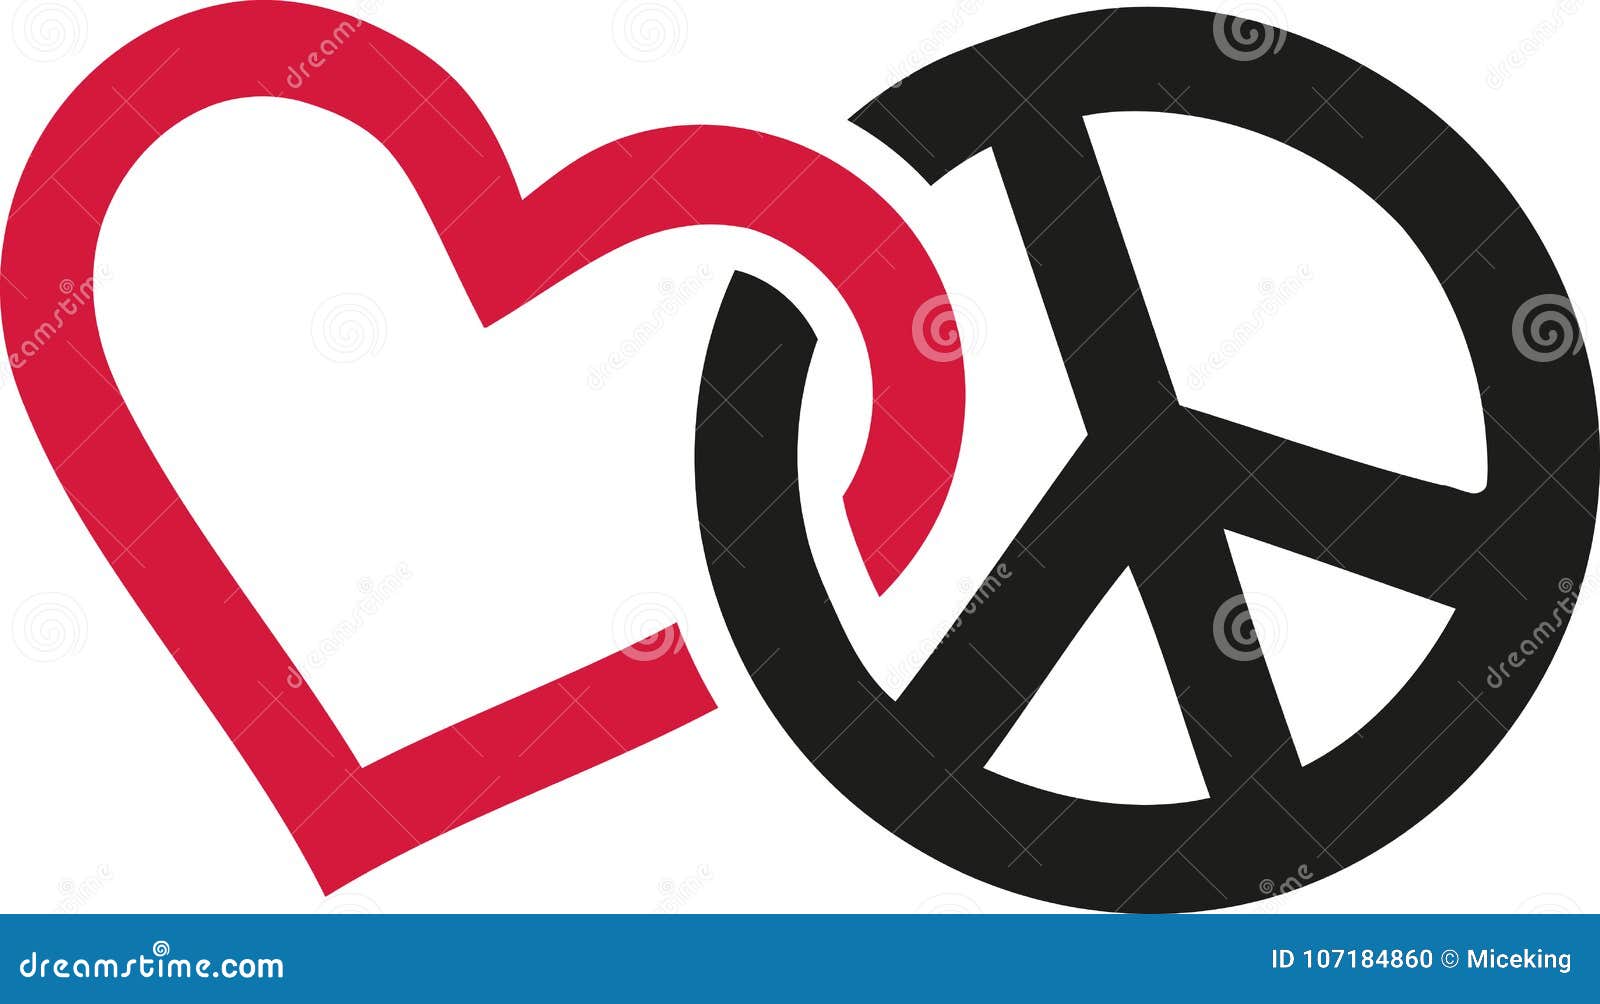 Love and Peace Signs Intertwined Stock Vector - Illustration of peaceful,  logo: 107184860